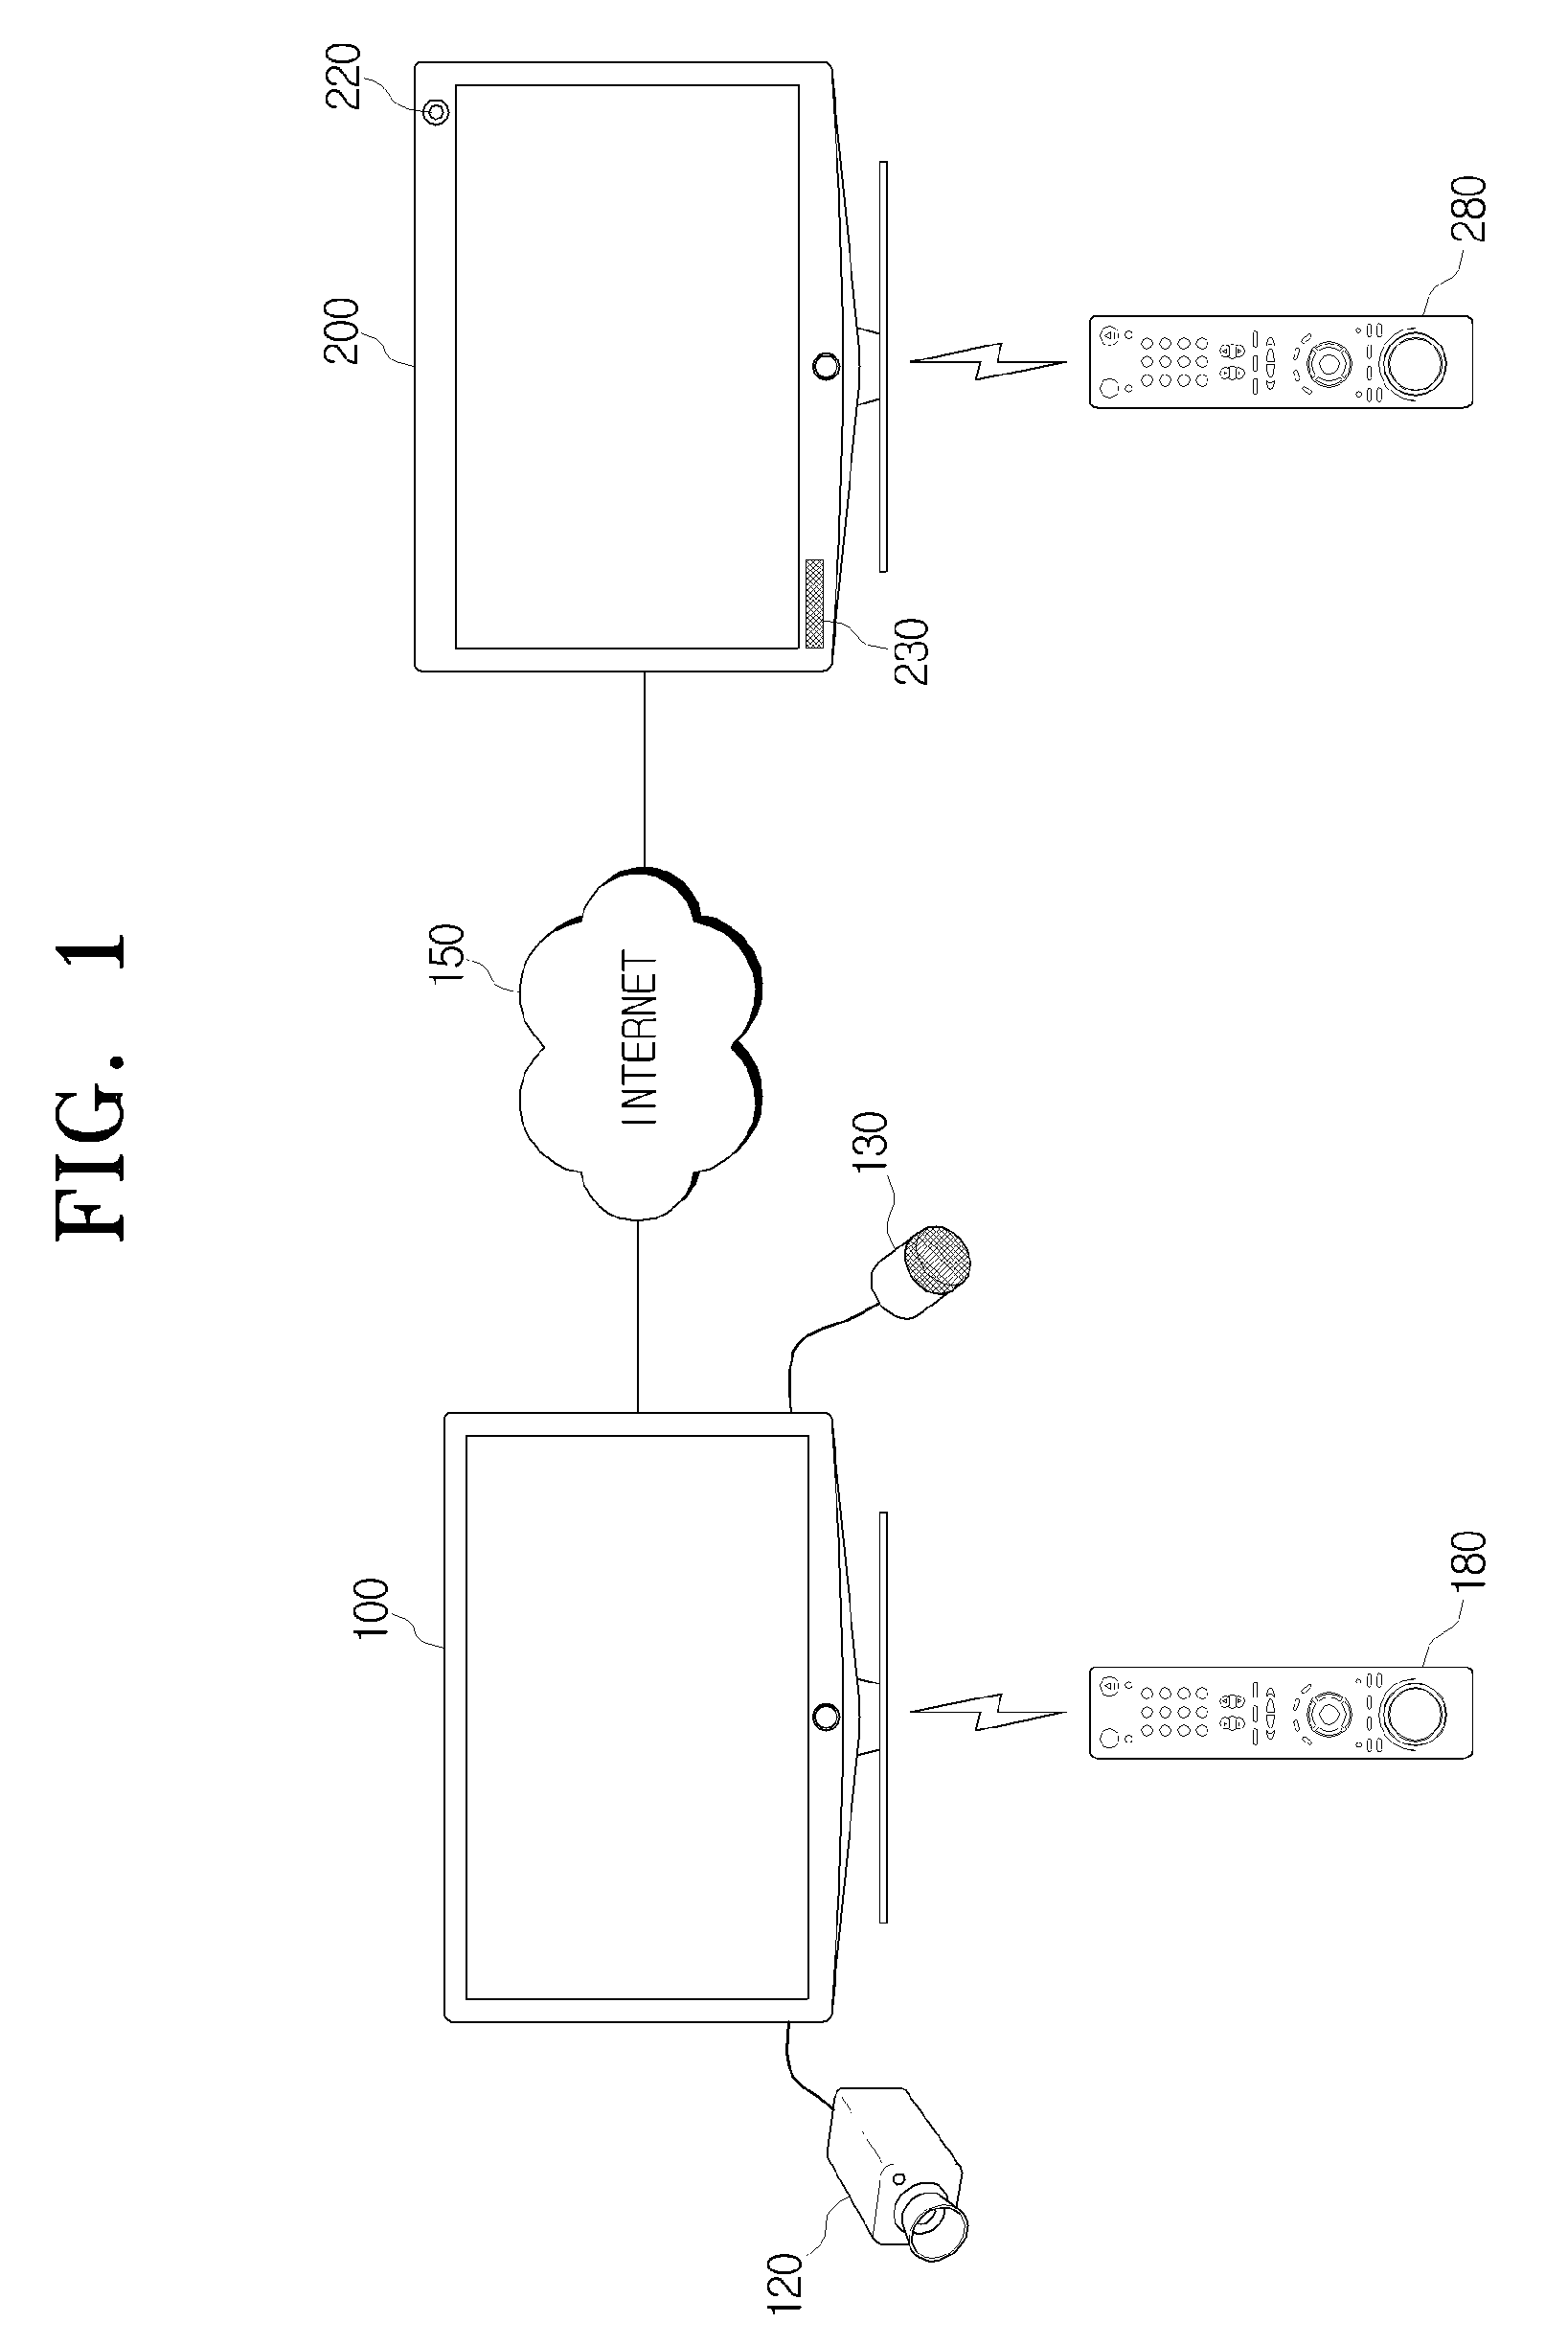 Method for providing viewing information for displaying a list of channels viewed by call recipients